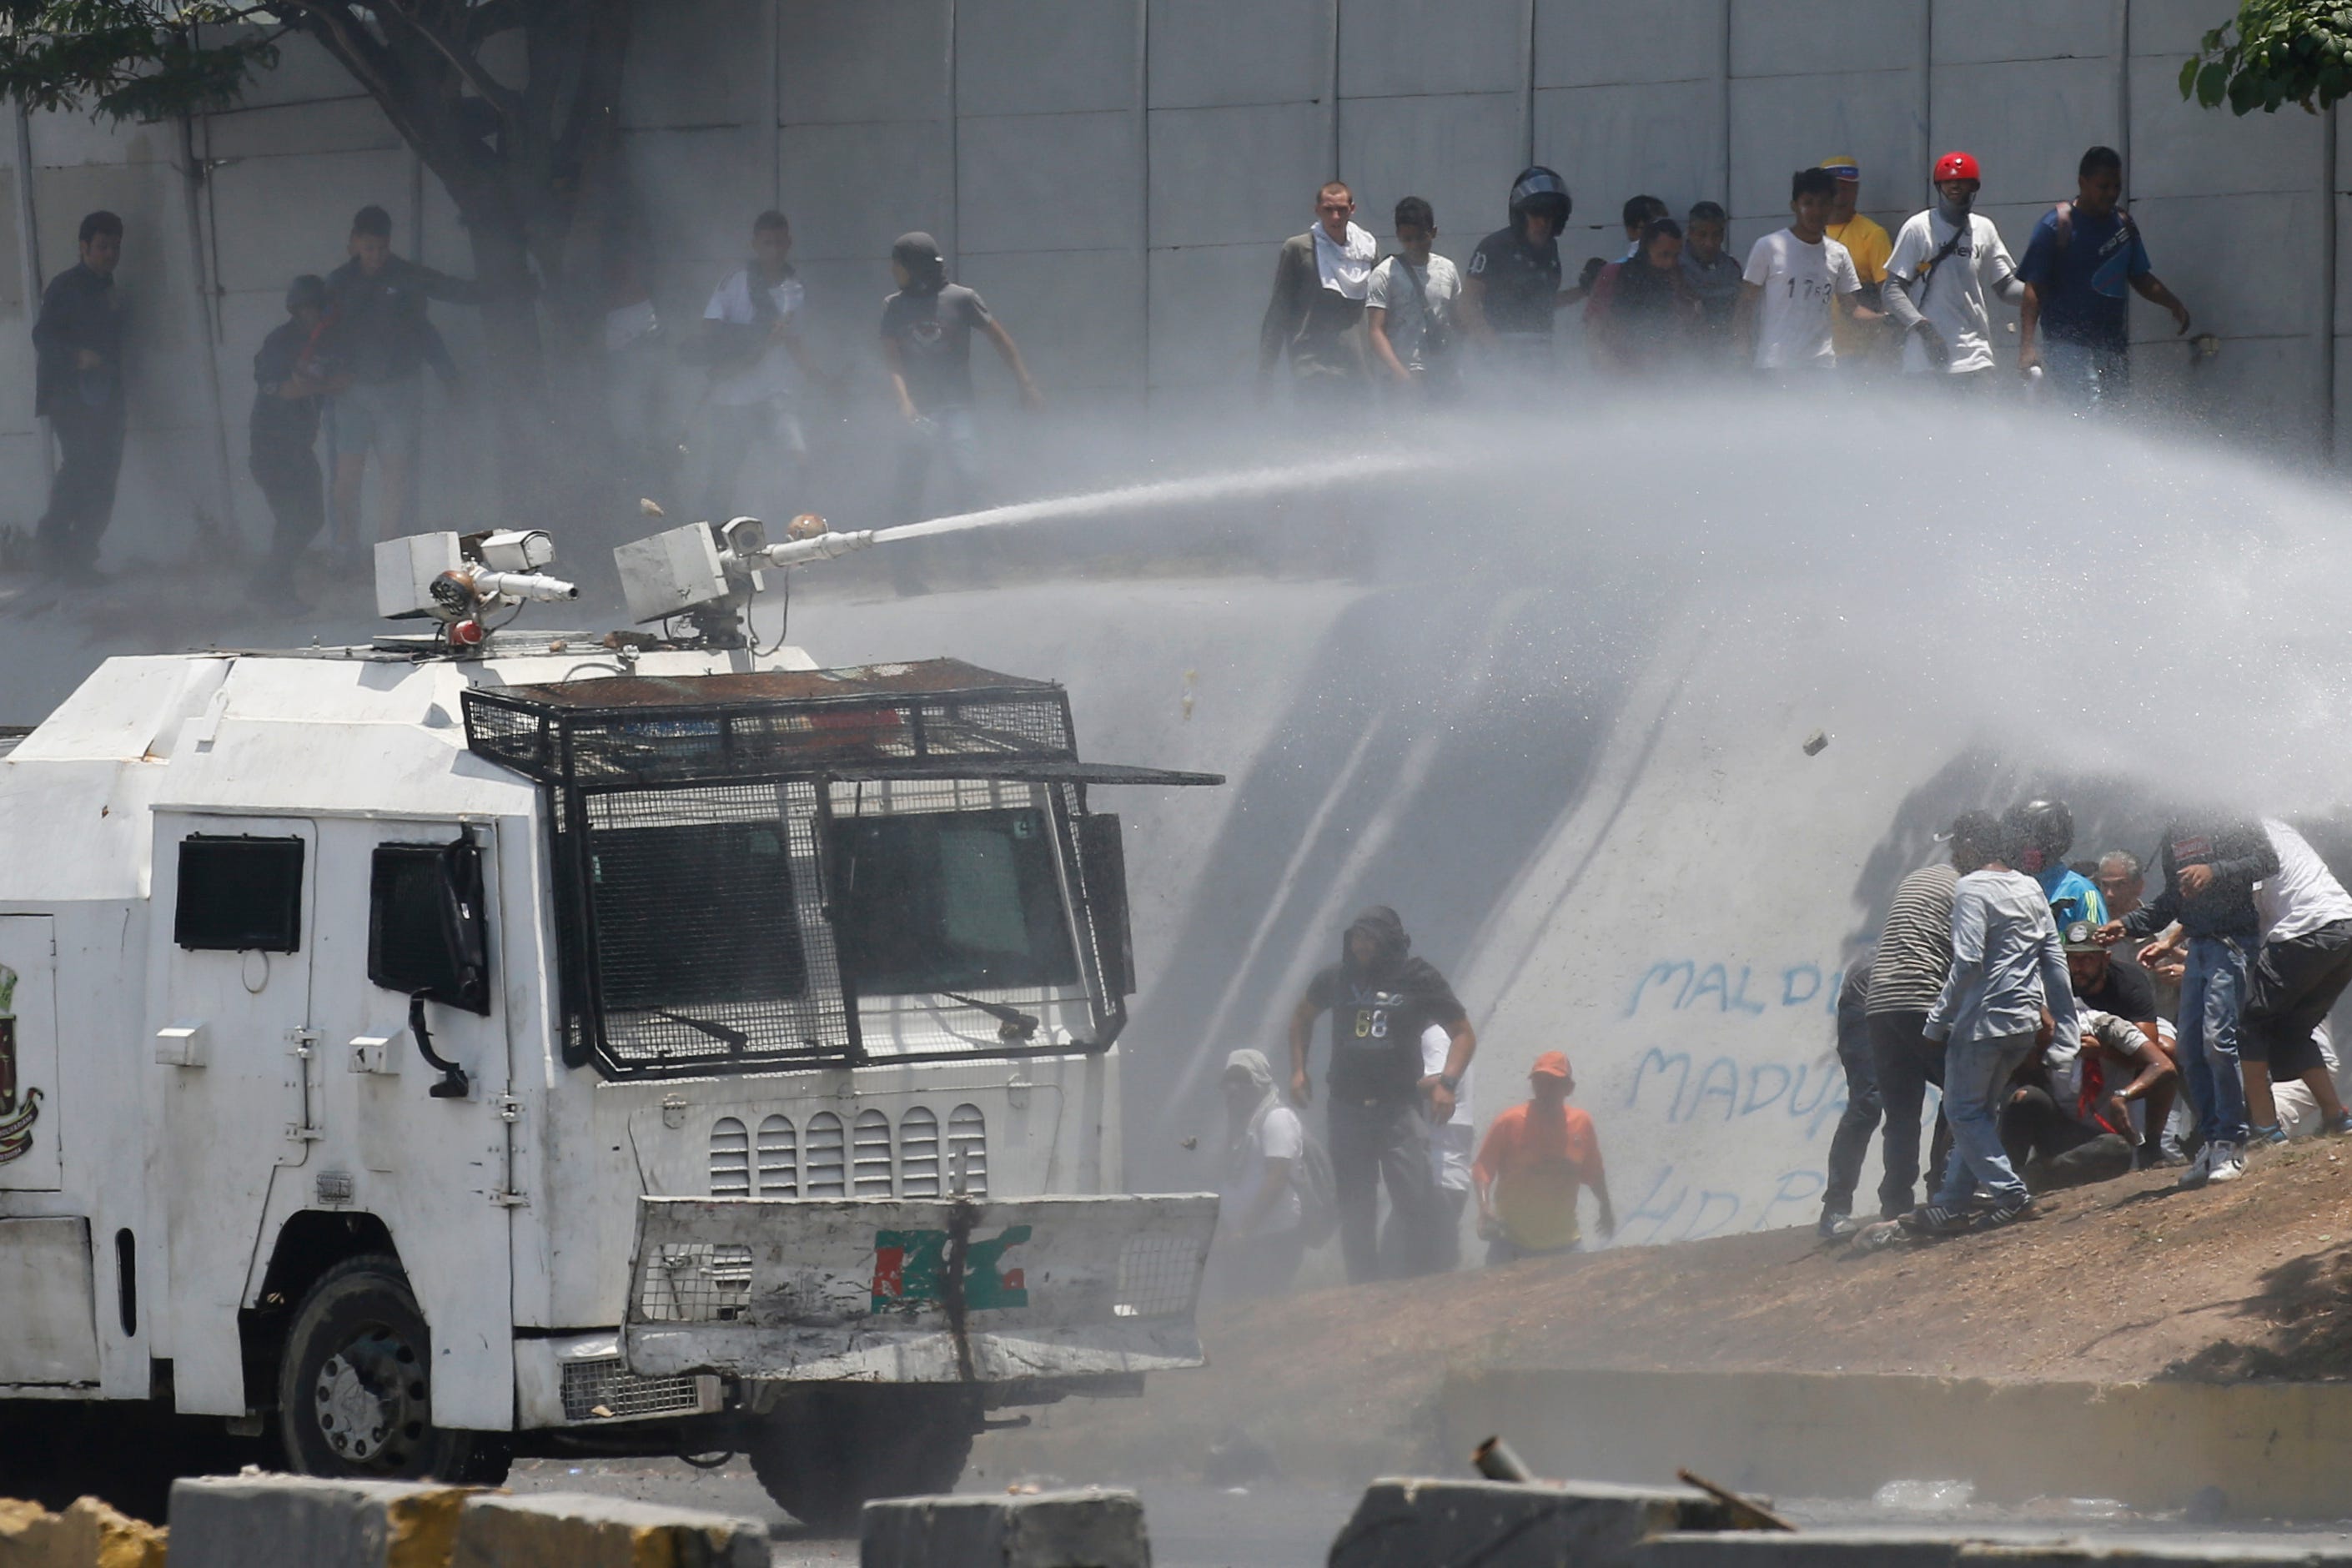 A Bolivarian National Guard water canon sprays opponents of Venezuela's President Nicolas Maduro during an attempted military uprising and anti-government protests in Caracas, Venezuela, Tuesday, April 30, 2019. Venezuelan opposition leader Juan Guaido and jailed opposition leader Leopoldo Lopez took to the streets with a small contingent of heavily armed troops early Tuesday in a bold and risky call for the military to rise up and oust Maduro.